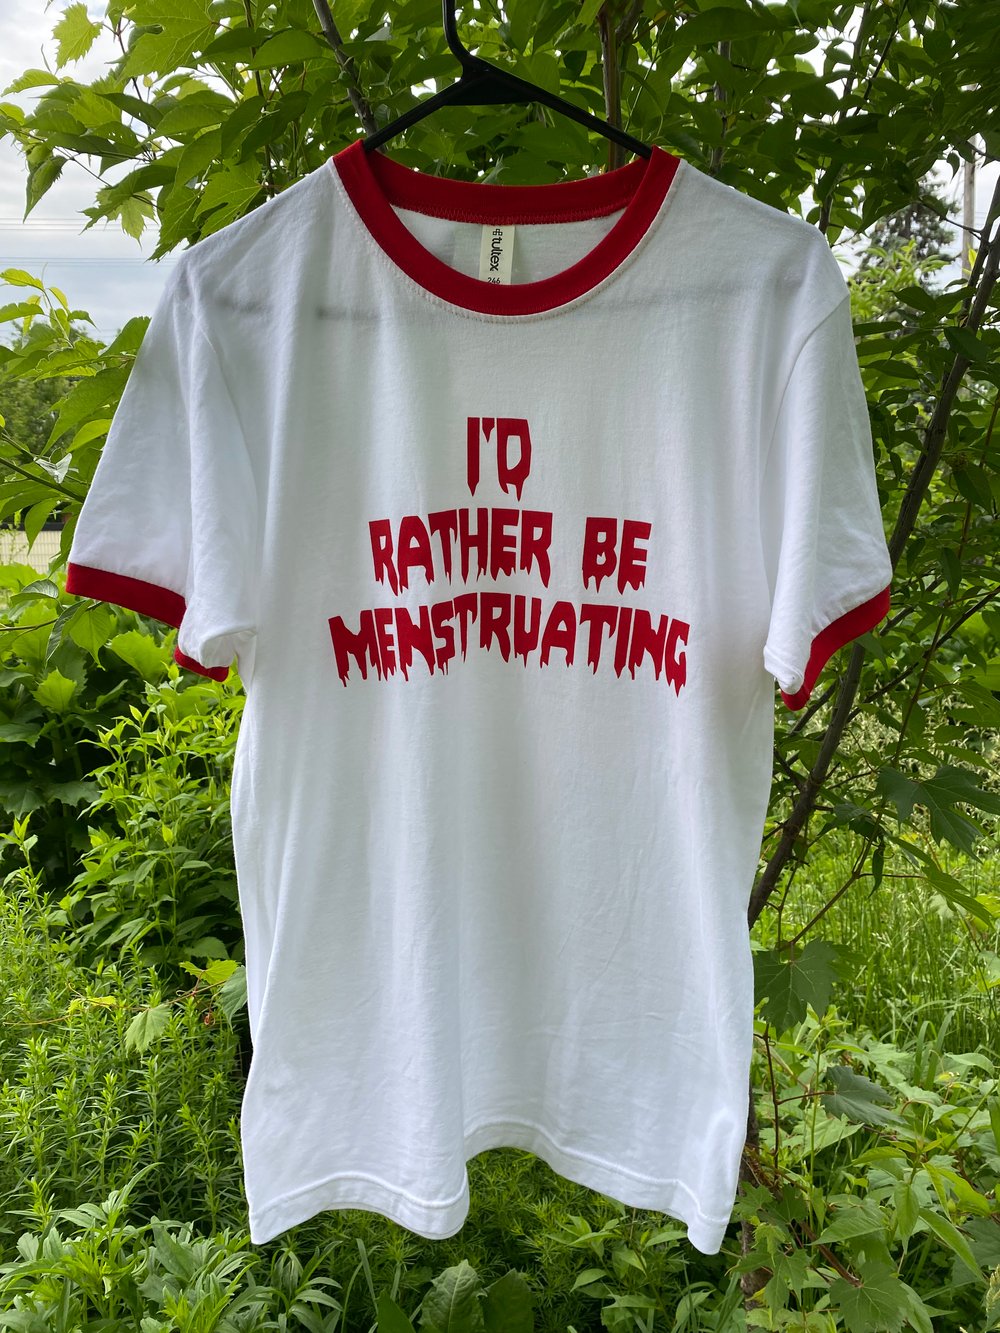 I'D RATHER BE MENSTRUATING tee